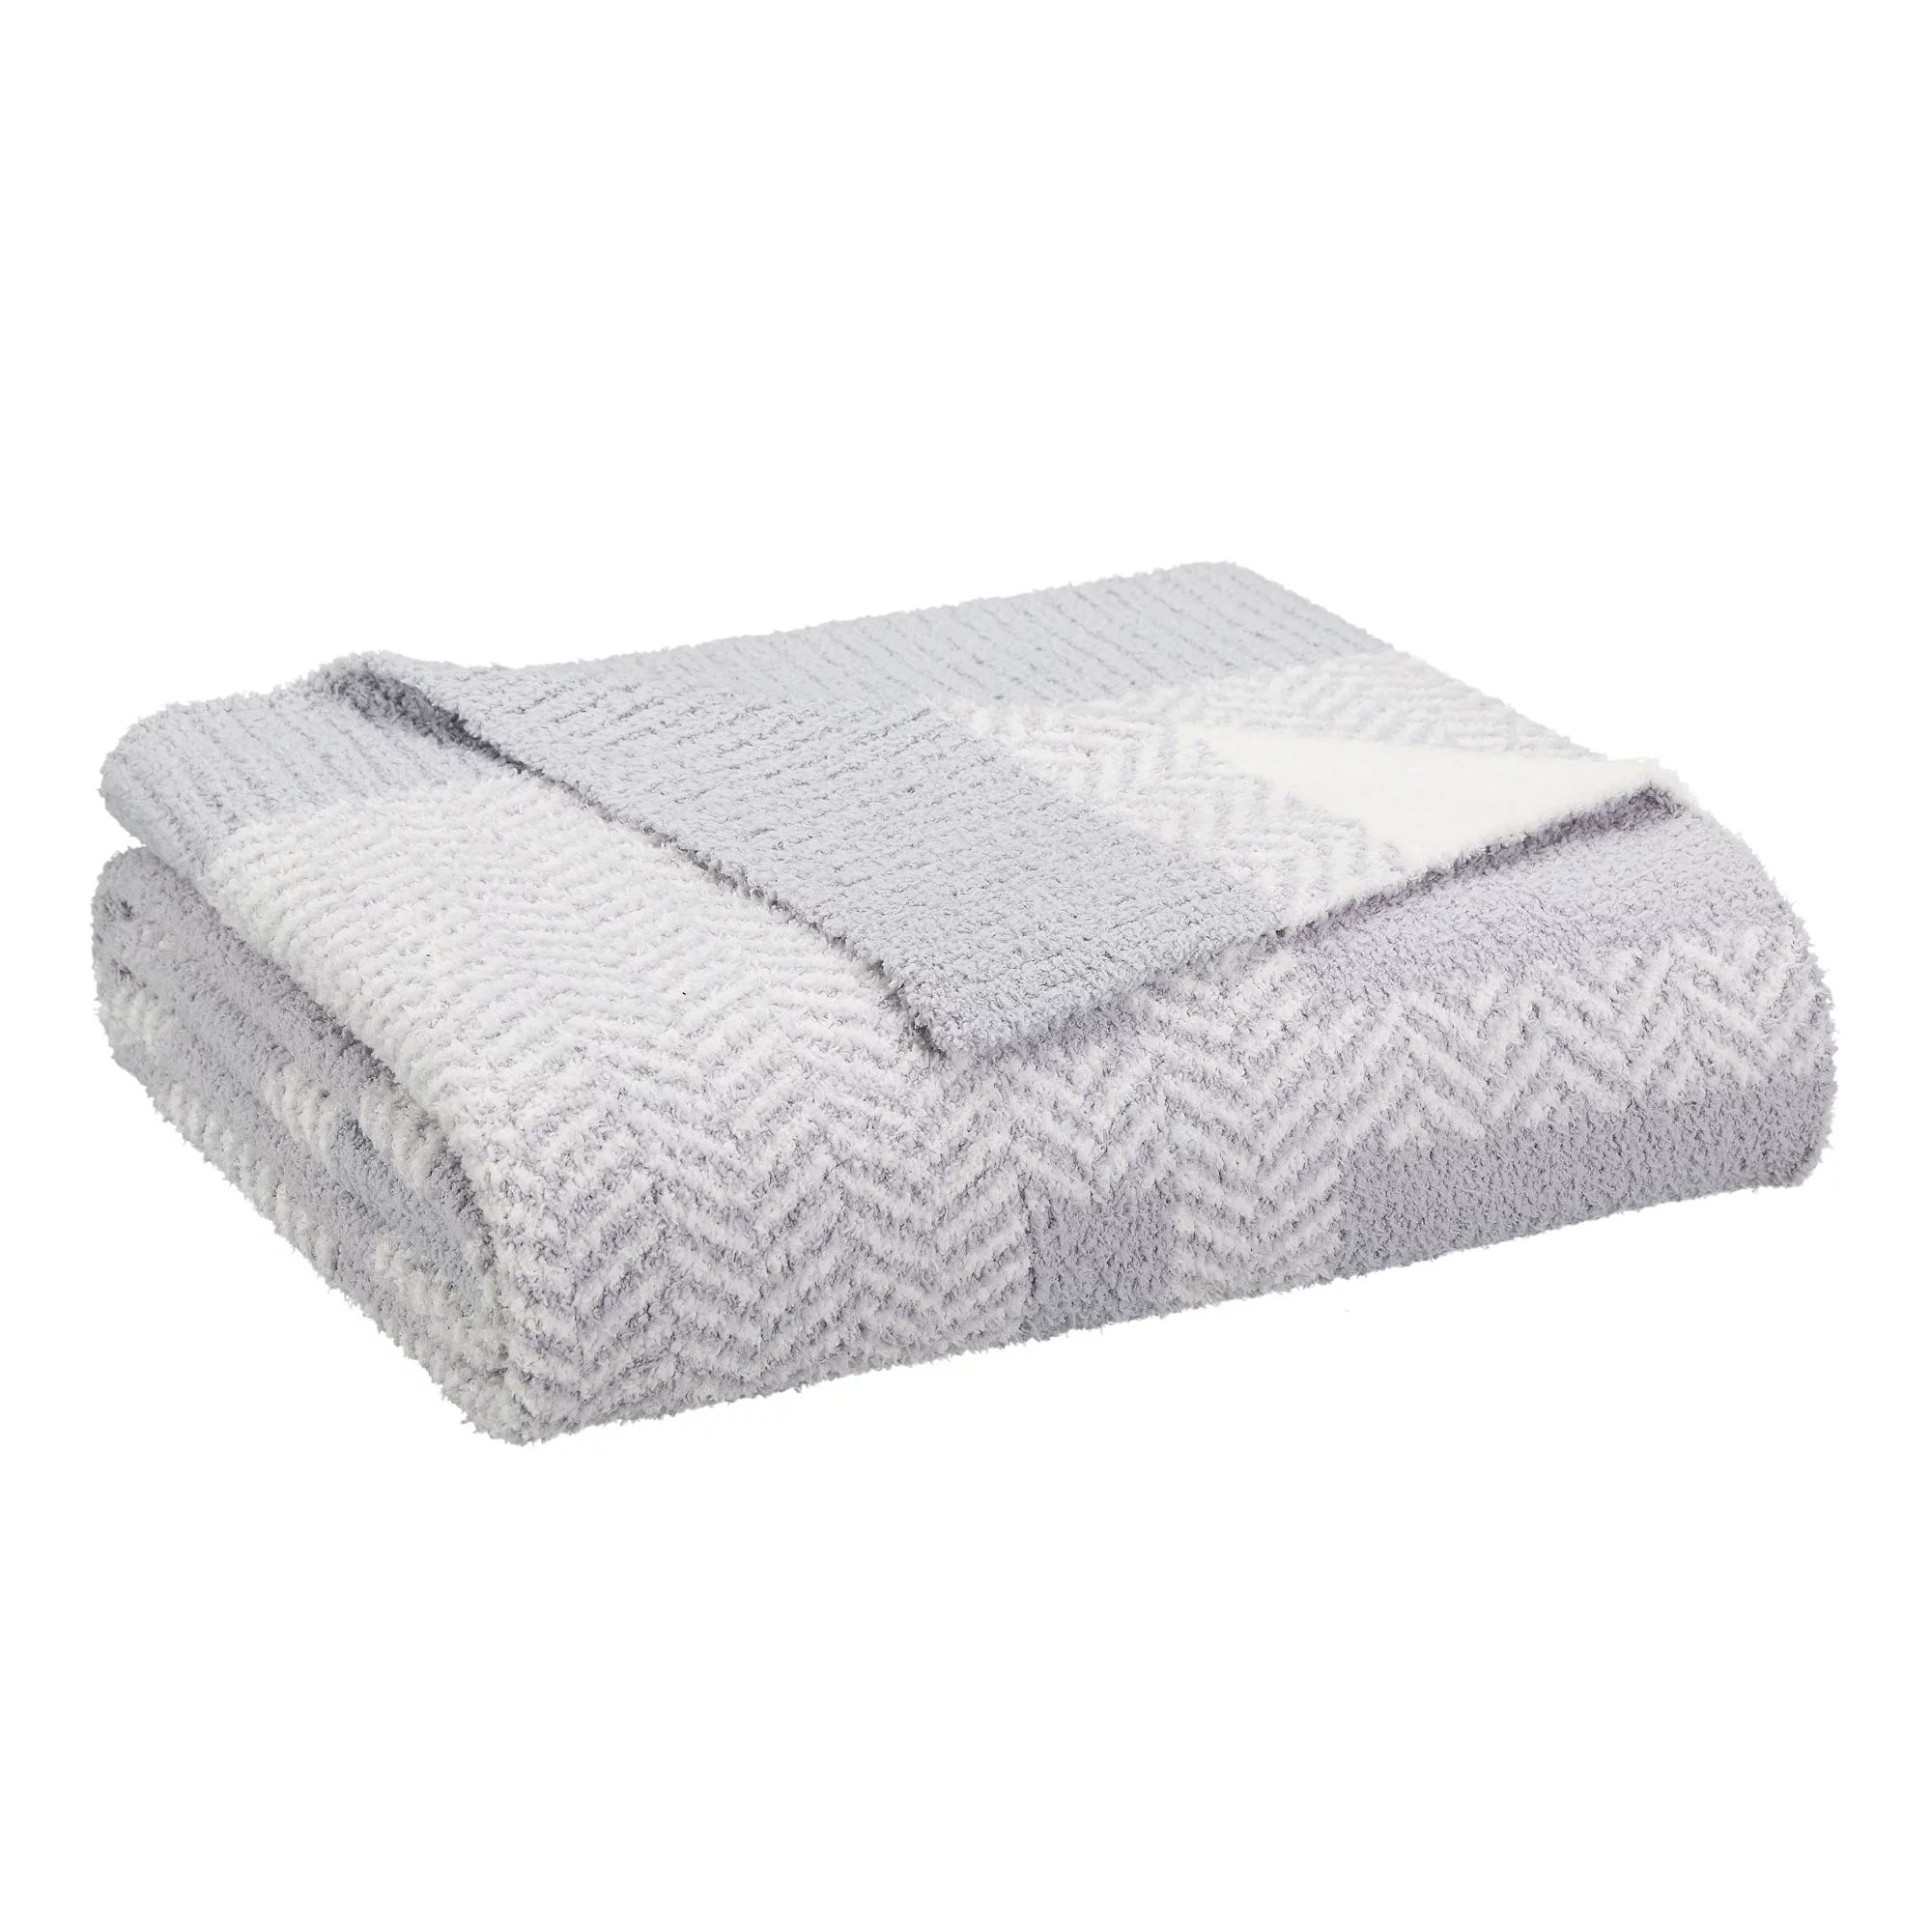 Better Homes and Gardens Cozy Knit Throw, 50"x72", Gray Plaid | Walmart (US)